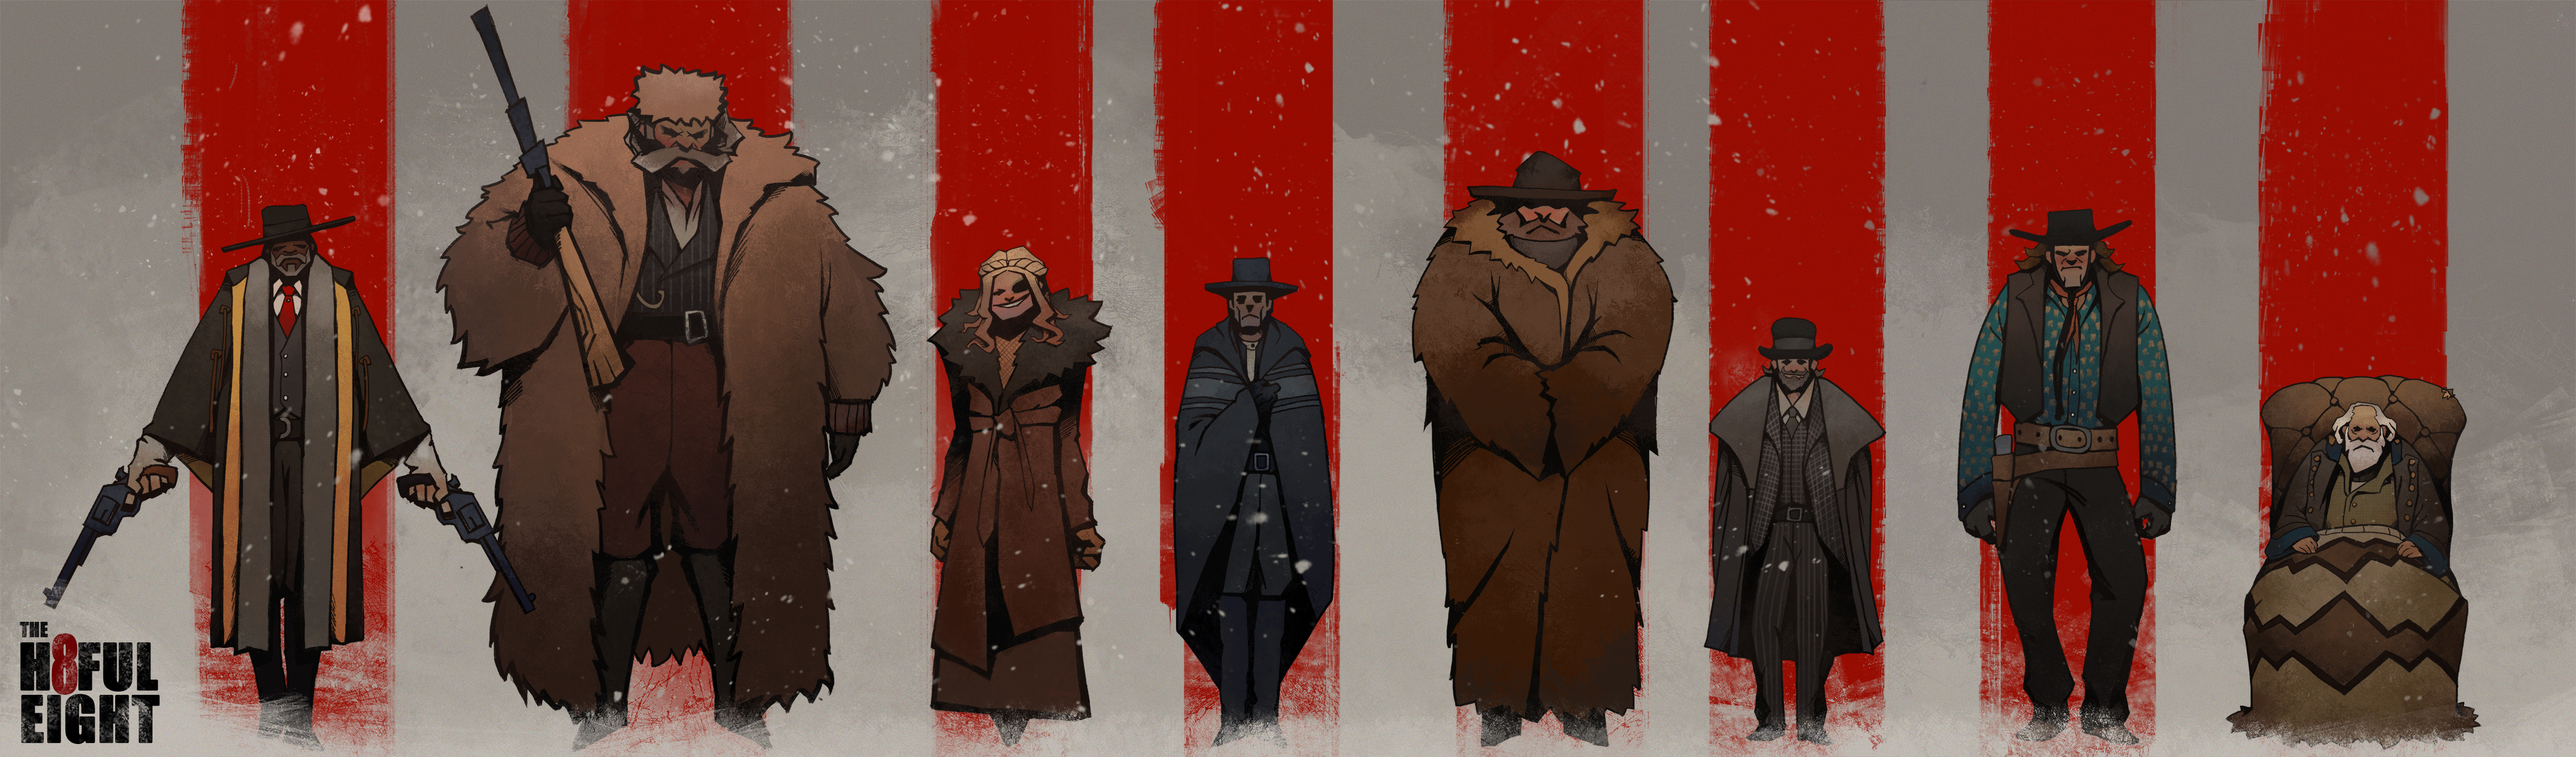 The Hateful Eight Pics, Movie Collection